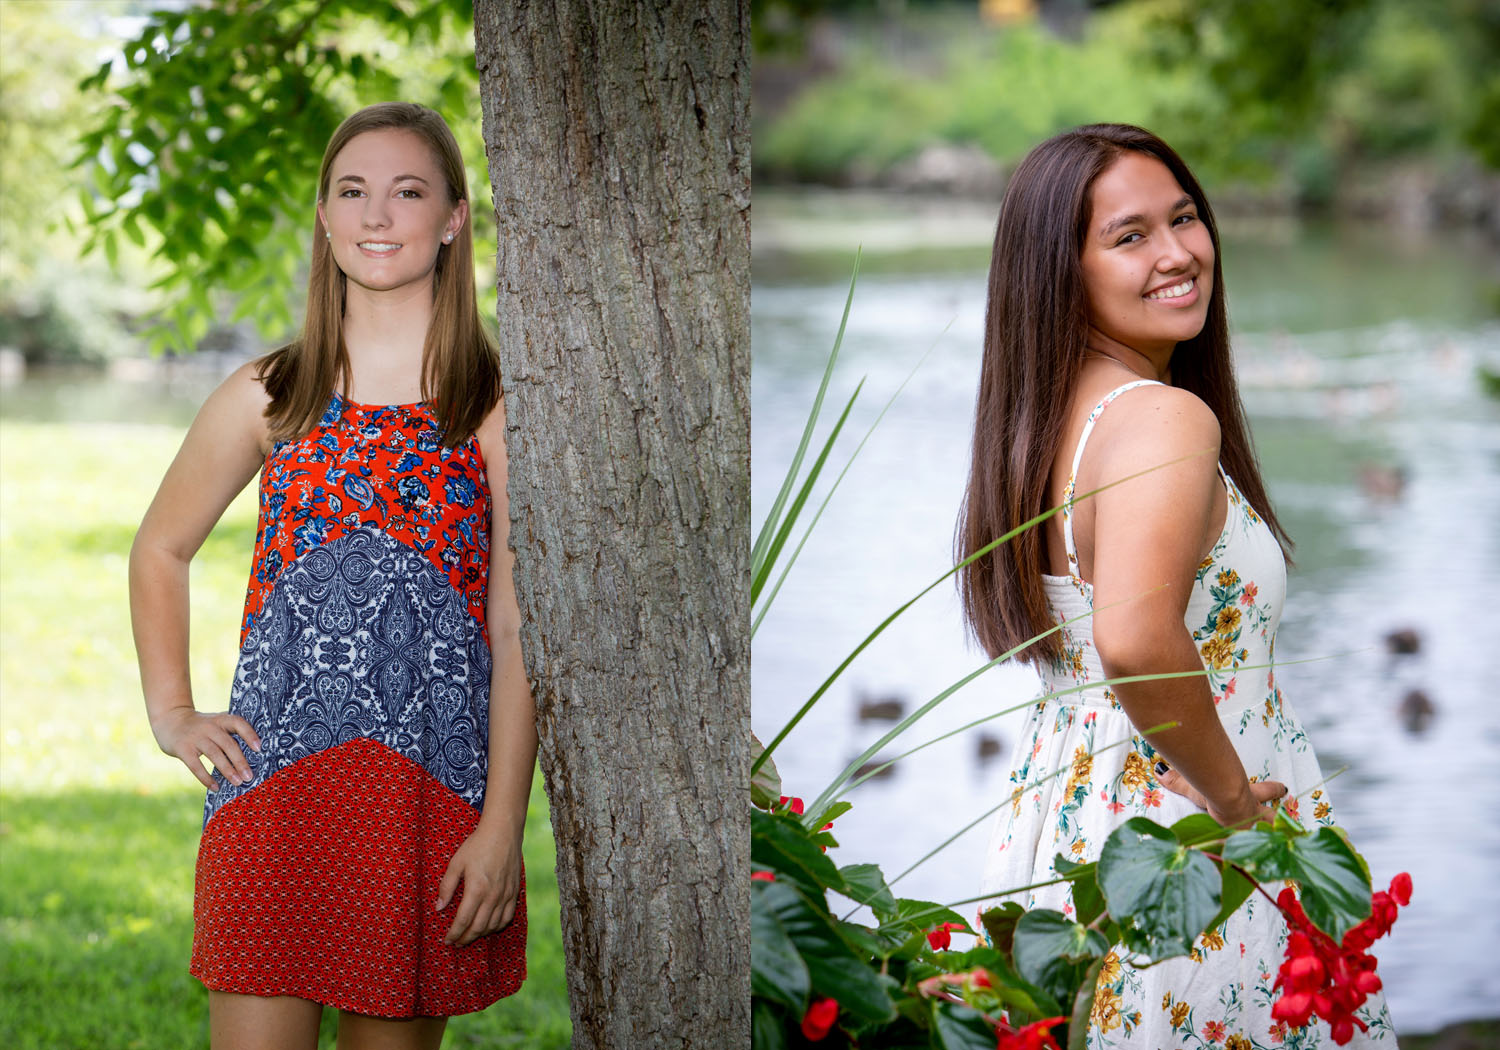 Indoor and Outdoor portraits at Boiling Springs High School - July 13, 2022 | Boiling_Springs_Outdoor_1.jpg